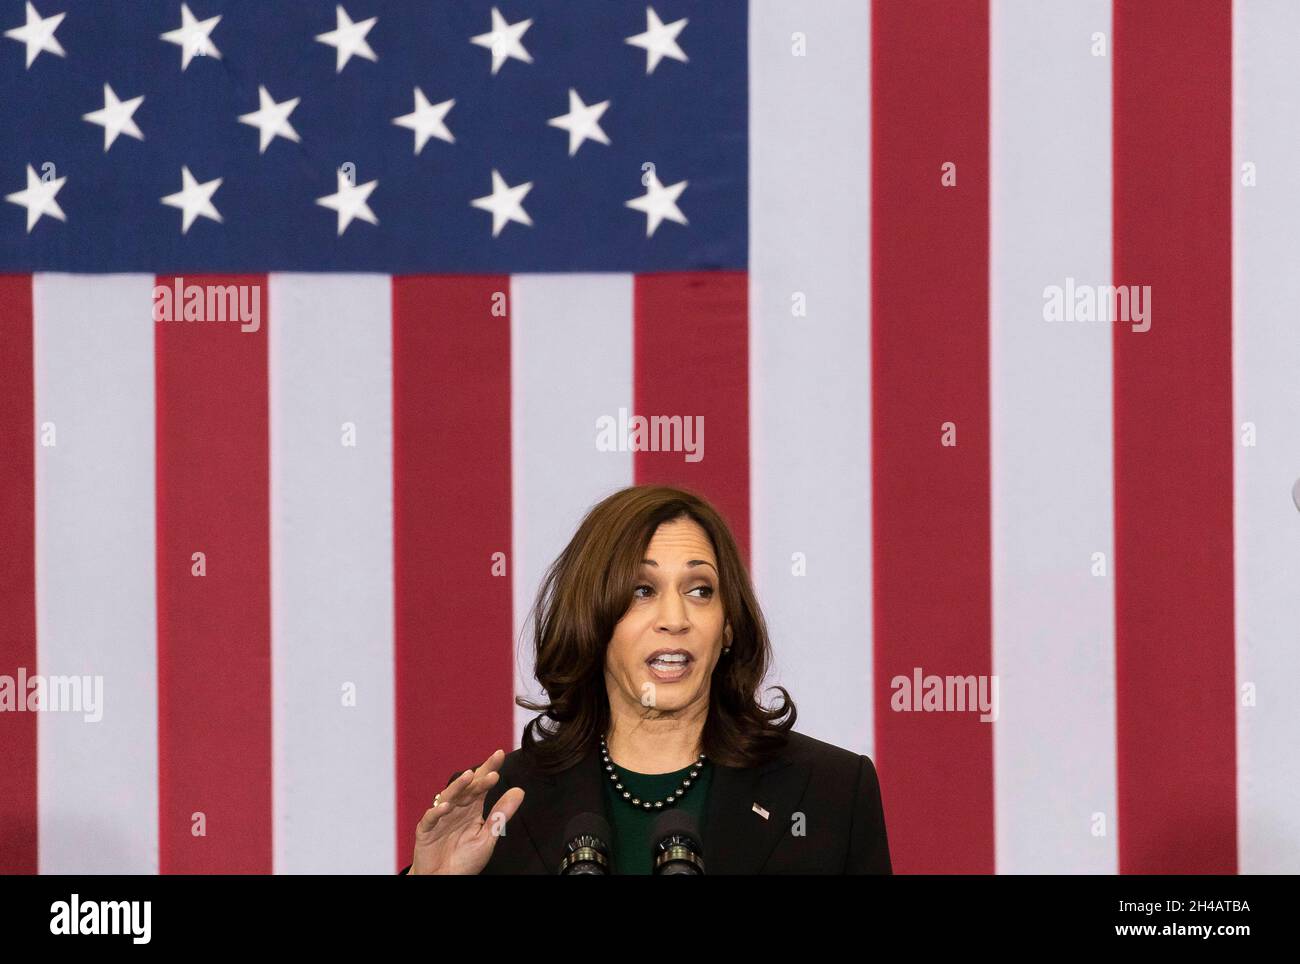 United States Vice President Kamala Harris speaks at an event promoting the Biden administration's Build Back Better agenda and and clean energy solutions in a Port Authority of New York and New Jersey hangar at John F. Kennedy International airport in the Queens borough of New York, New York, USA, 01 November 2021.Credit: Justin Lane/Pool via CNP /MediaPunch Stock Photo